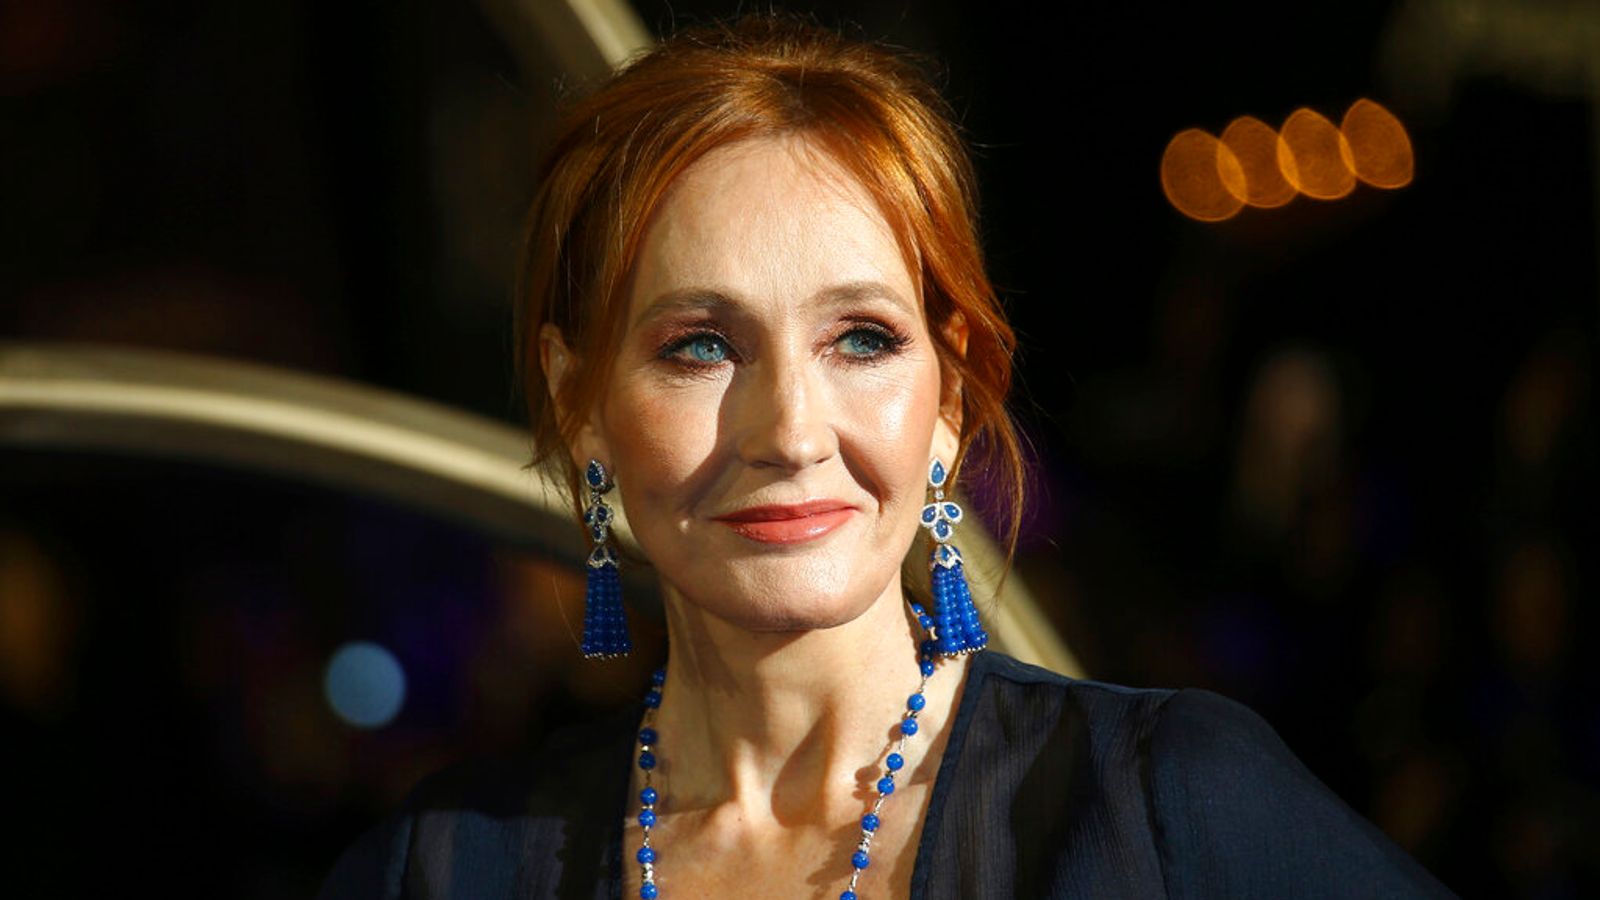 JK Rowling references removed from Seattle museum after blog post